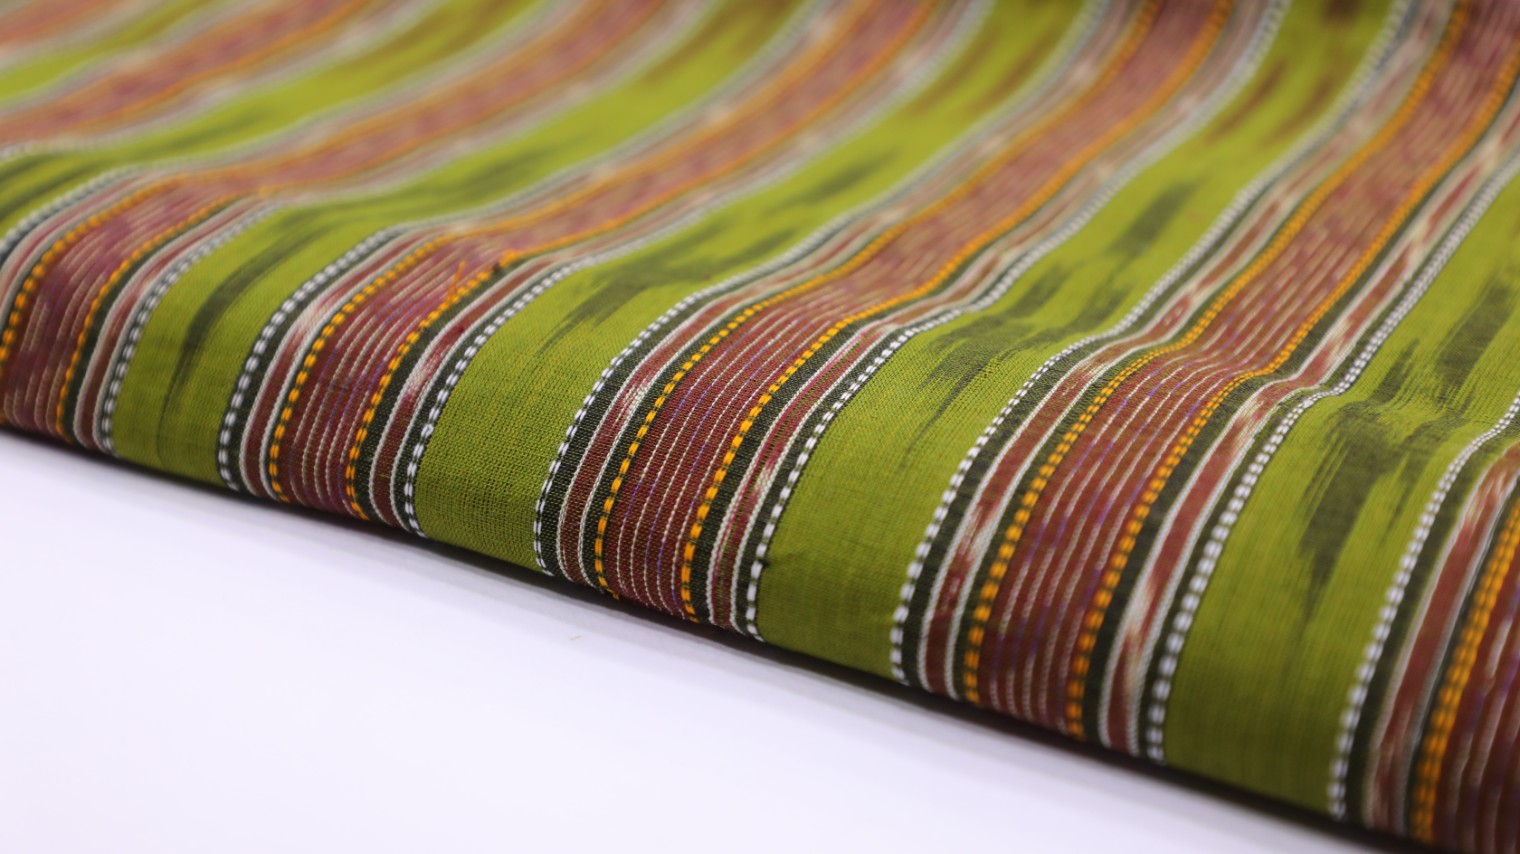 OLIVE GREEN COLOR COTTON IKAT GEOMETRIC MAROON STRIPES WEAVE FABRIC - 4061